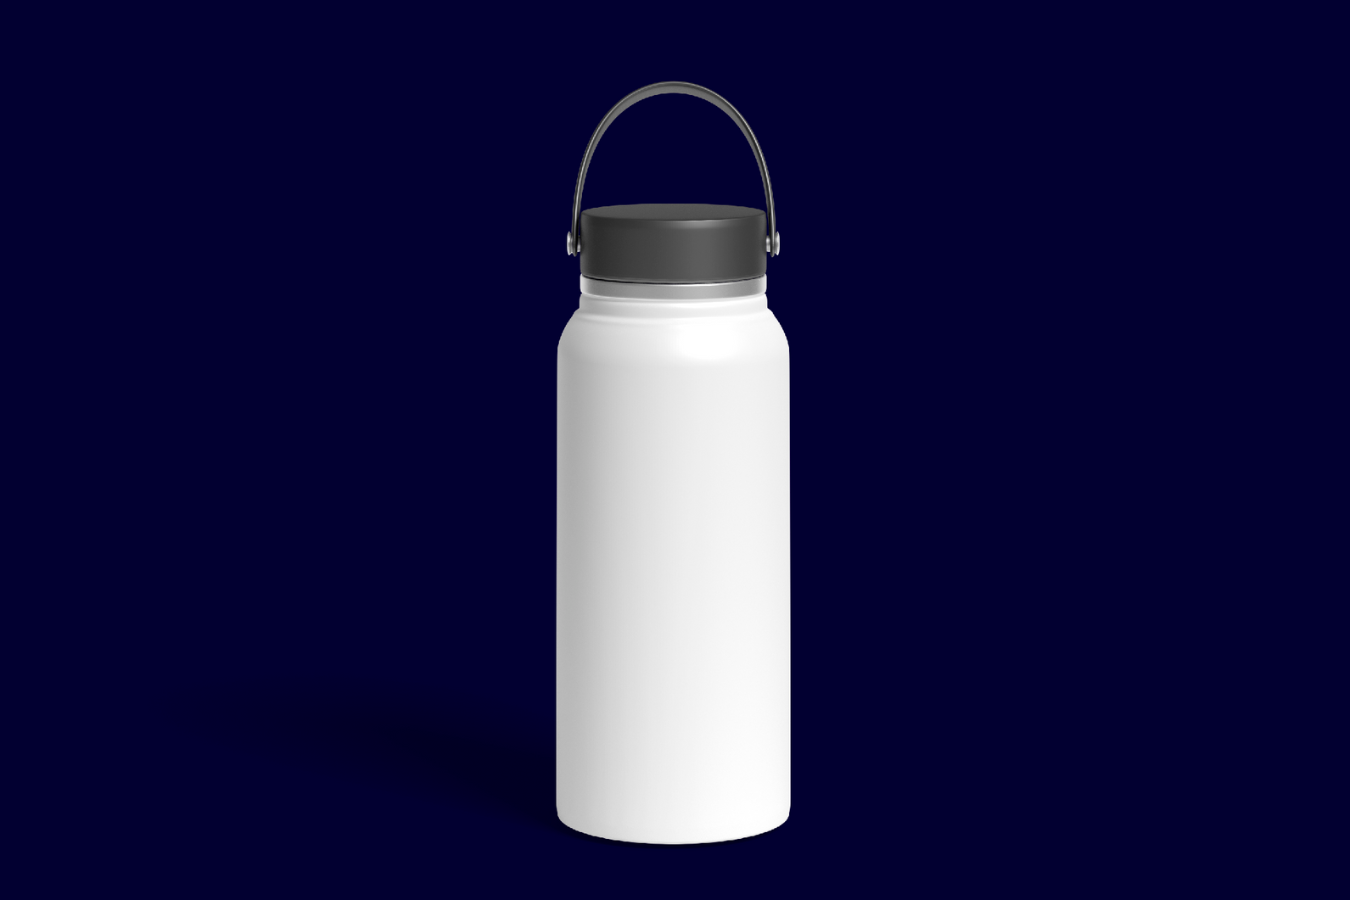 White insulated water bottle with a black cap against a blue background.